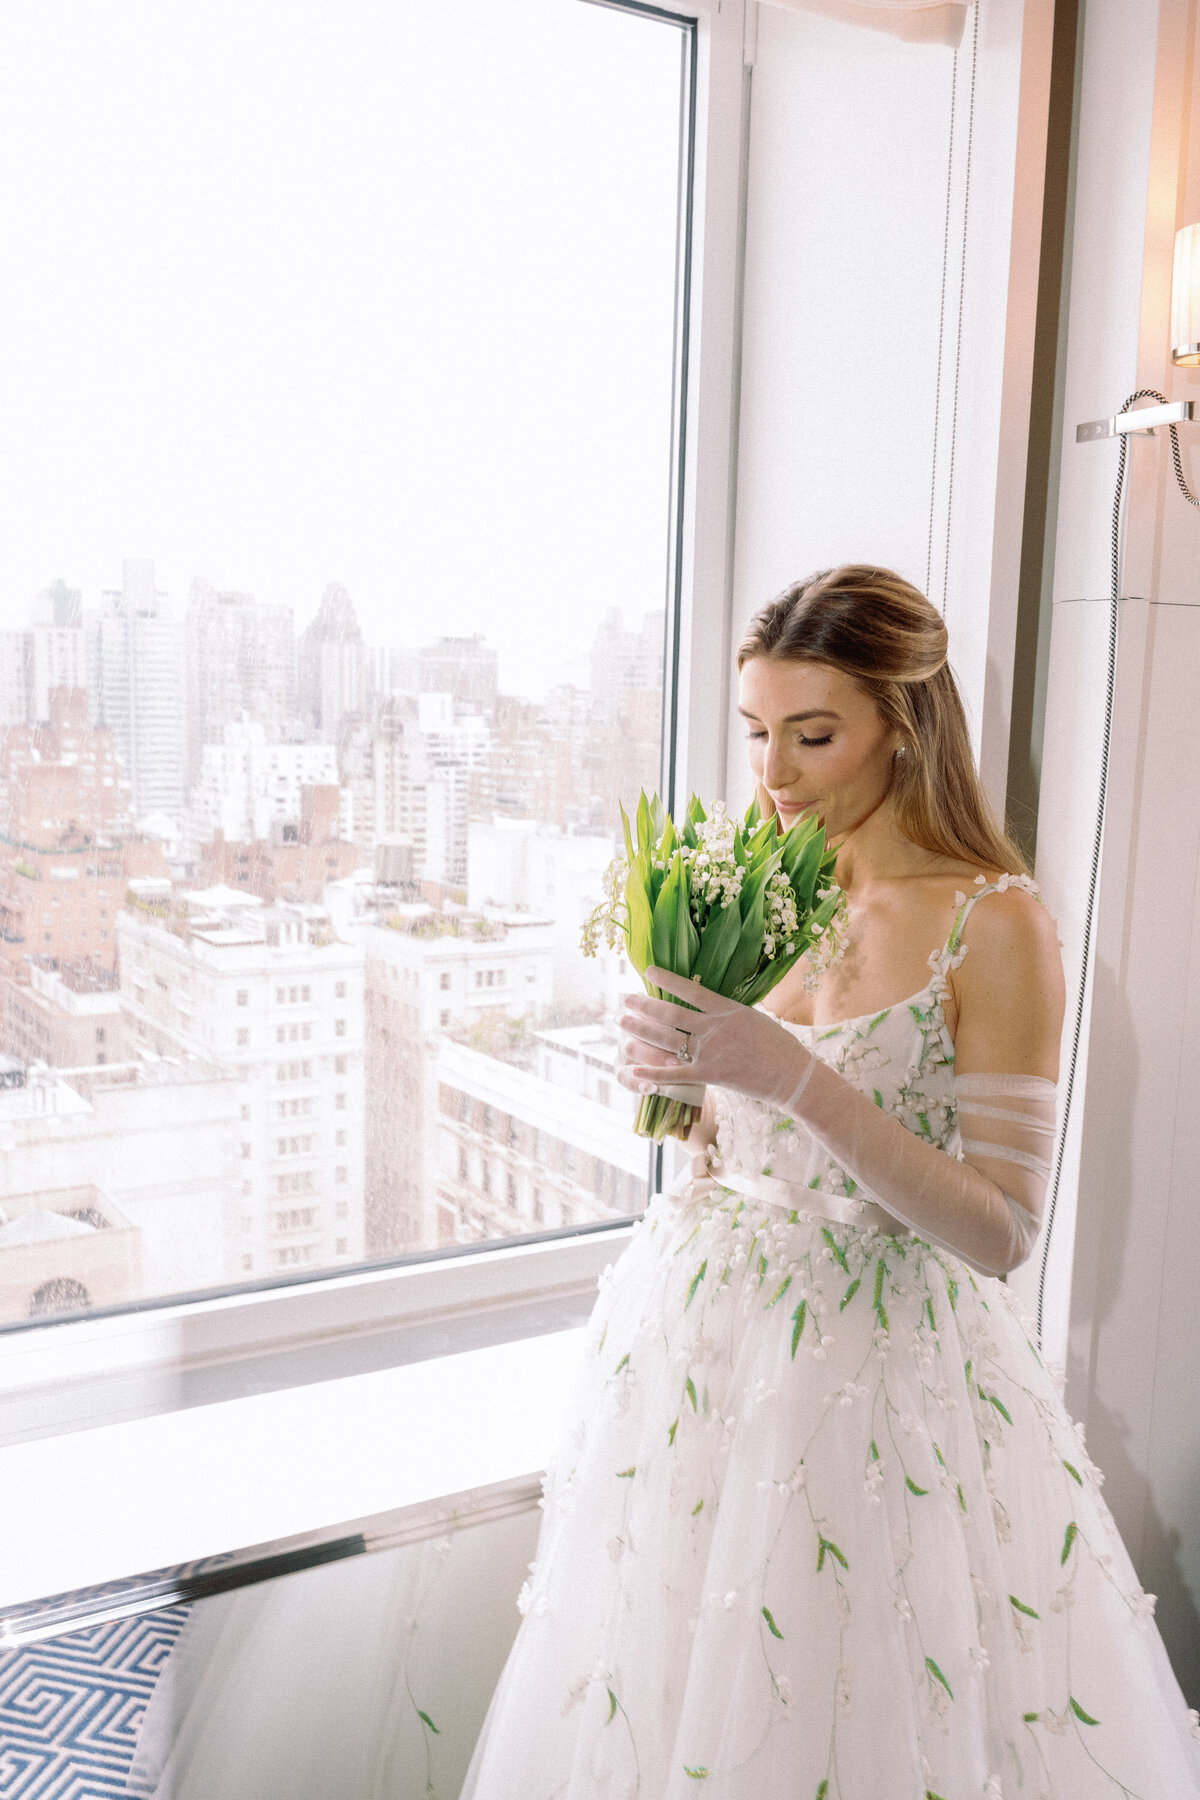 erica-renee-beauty-hair-and-makeup-duo-traveling-team-NYC-bride-carlyle-hotel-NYC-over-the-moon-bride-tess-gloves-lily-of-the-valley